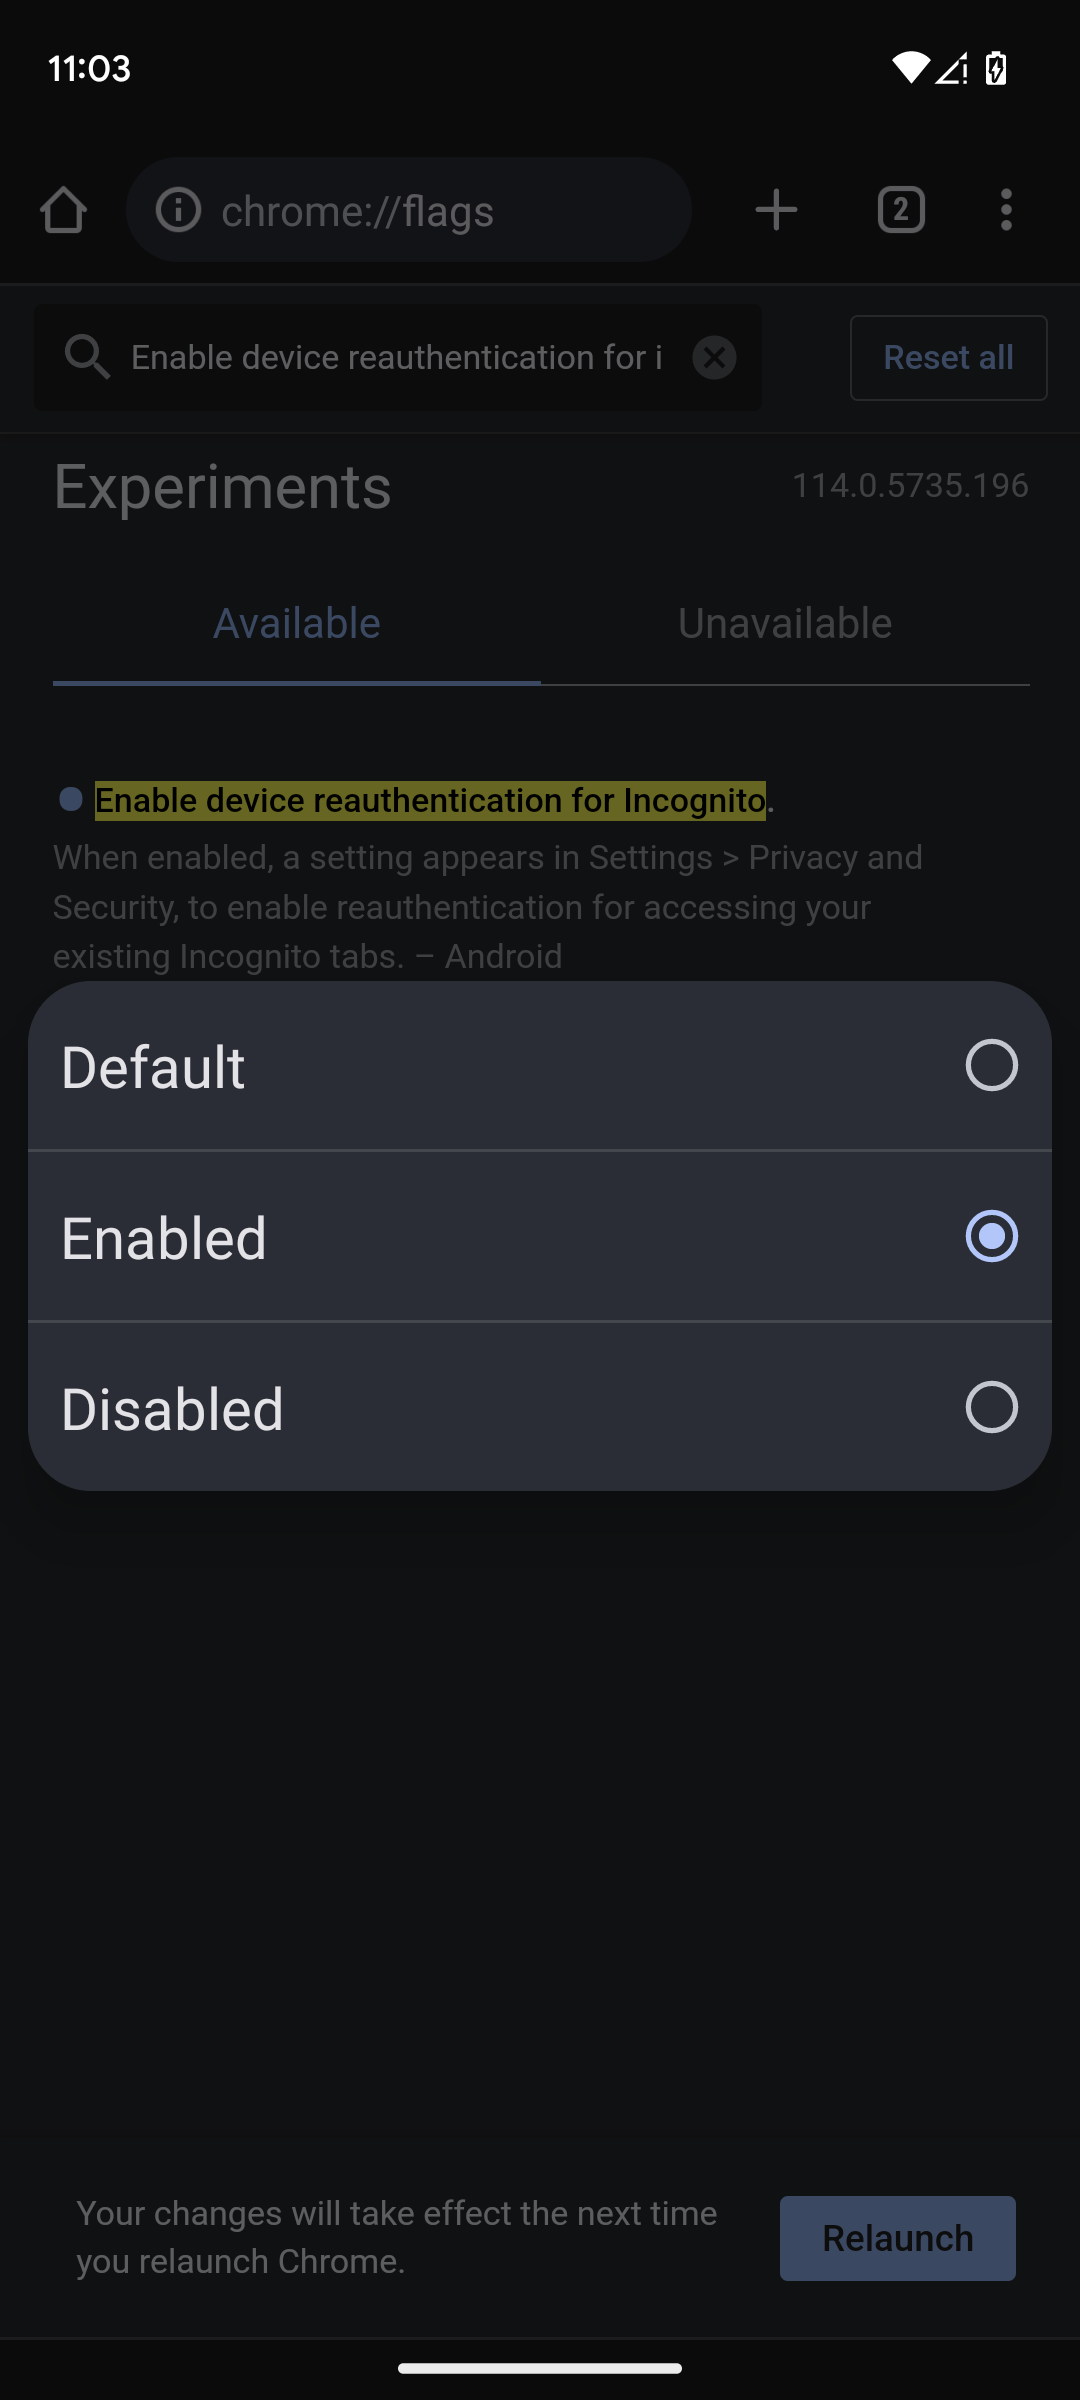 Enable device reauthentication for Incognito 2